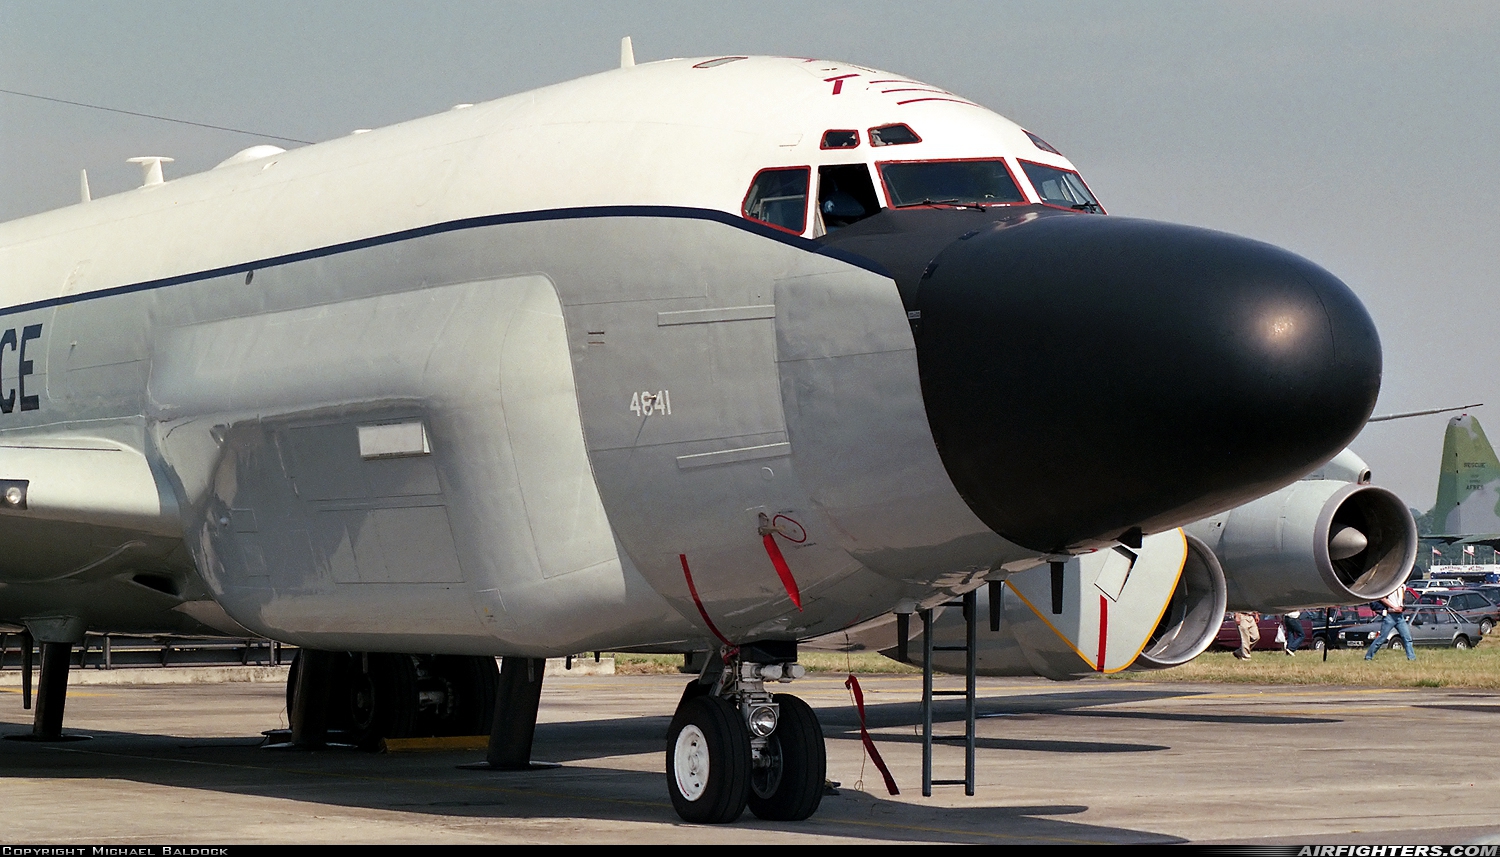 USA - Air Force Boeing RC-135V Rivet Joint (739-445B) 64-14841 at Fairford (FFD / EGVA), UK